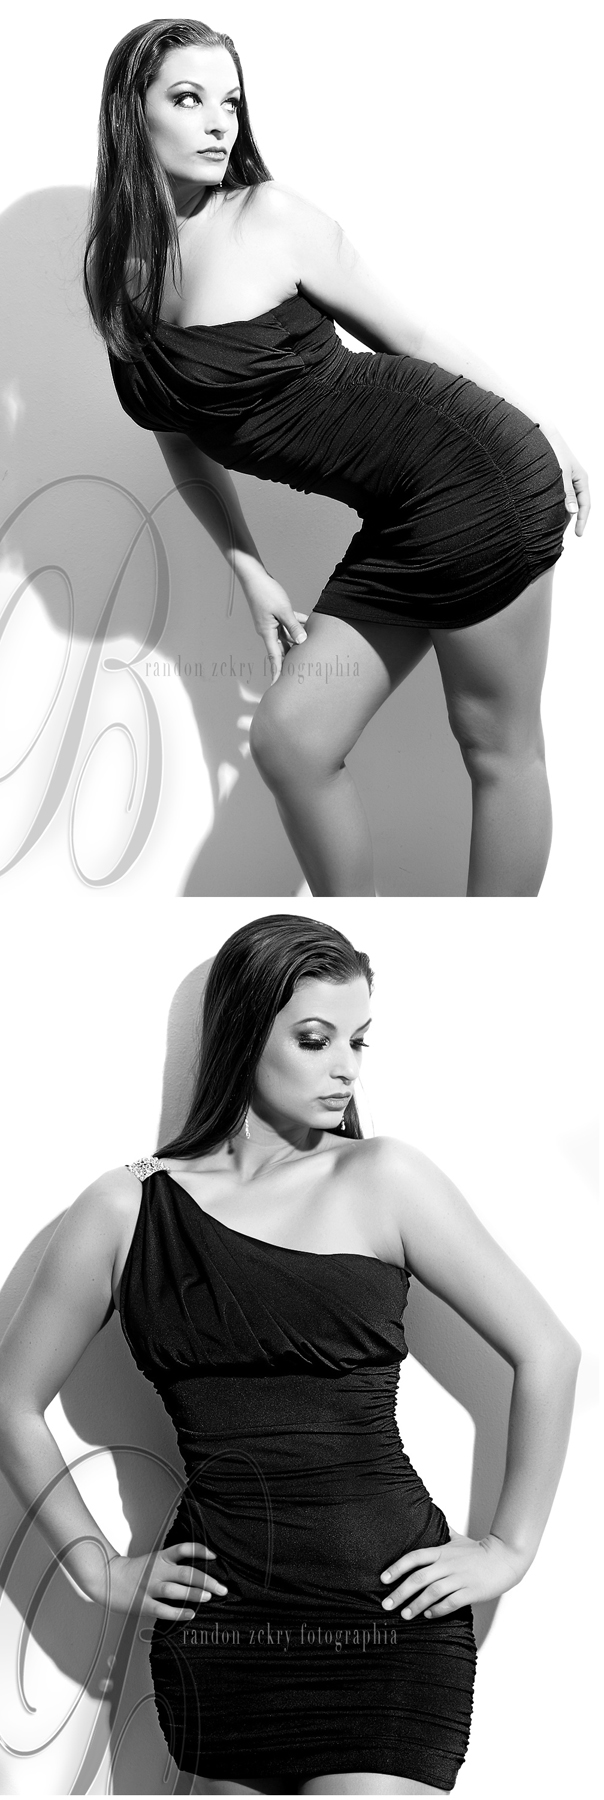 Female model photo shoot of Dani Byrd by Brandon Zackery Imagery in Florida, makeup by Damelza